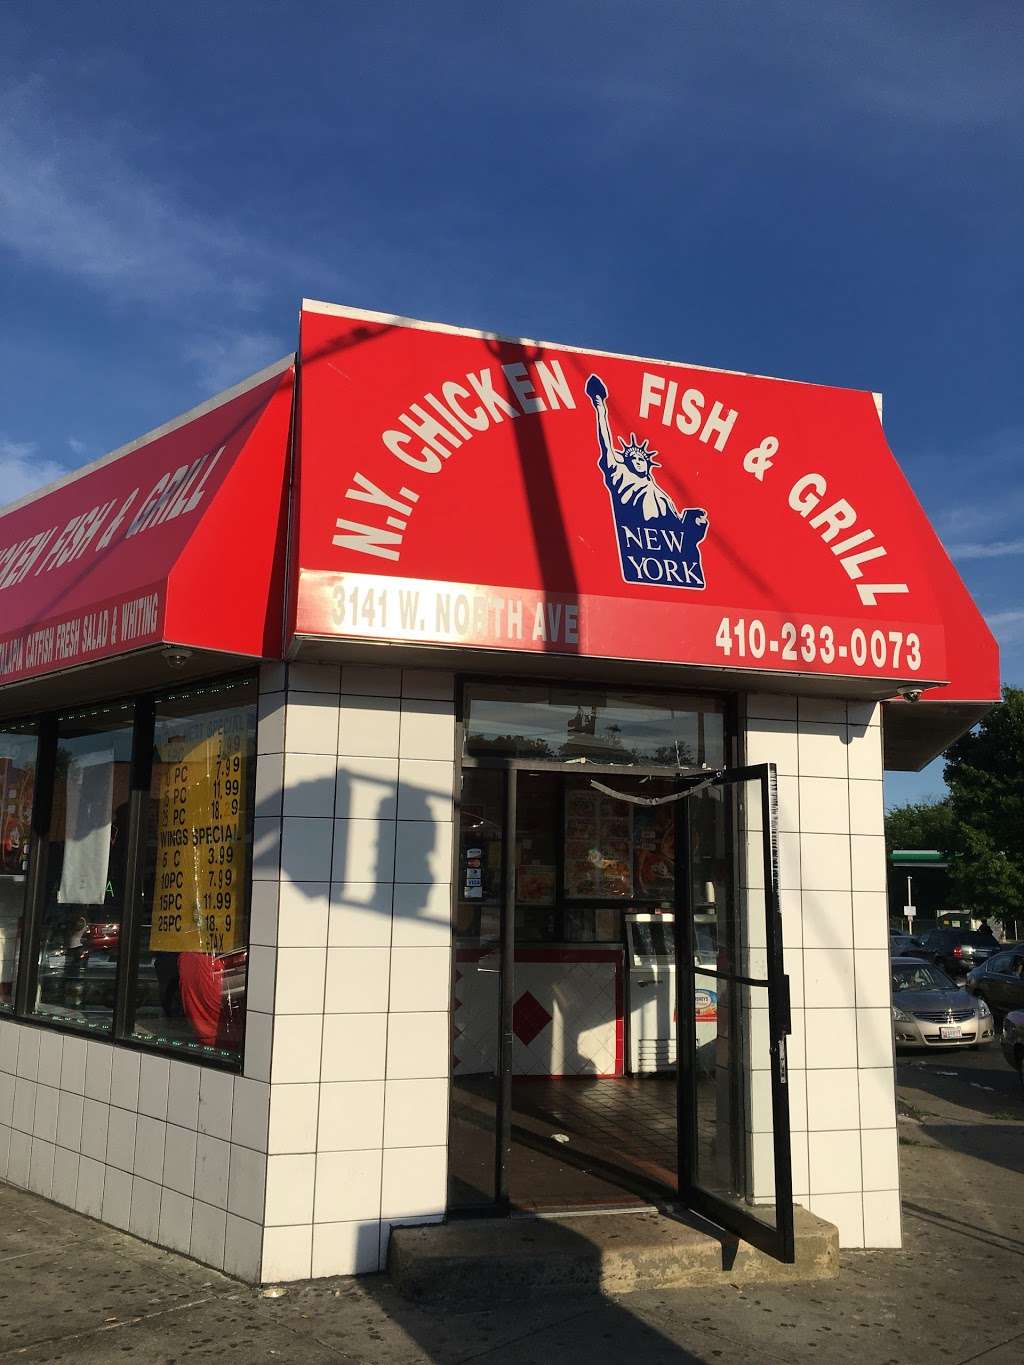 New York Fried Chicken | 3141 W North Ave, Baltimore, MD 21216 | Phone: (410) 233-0073